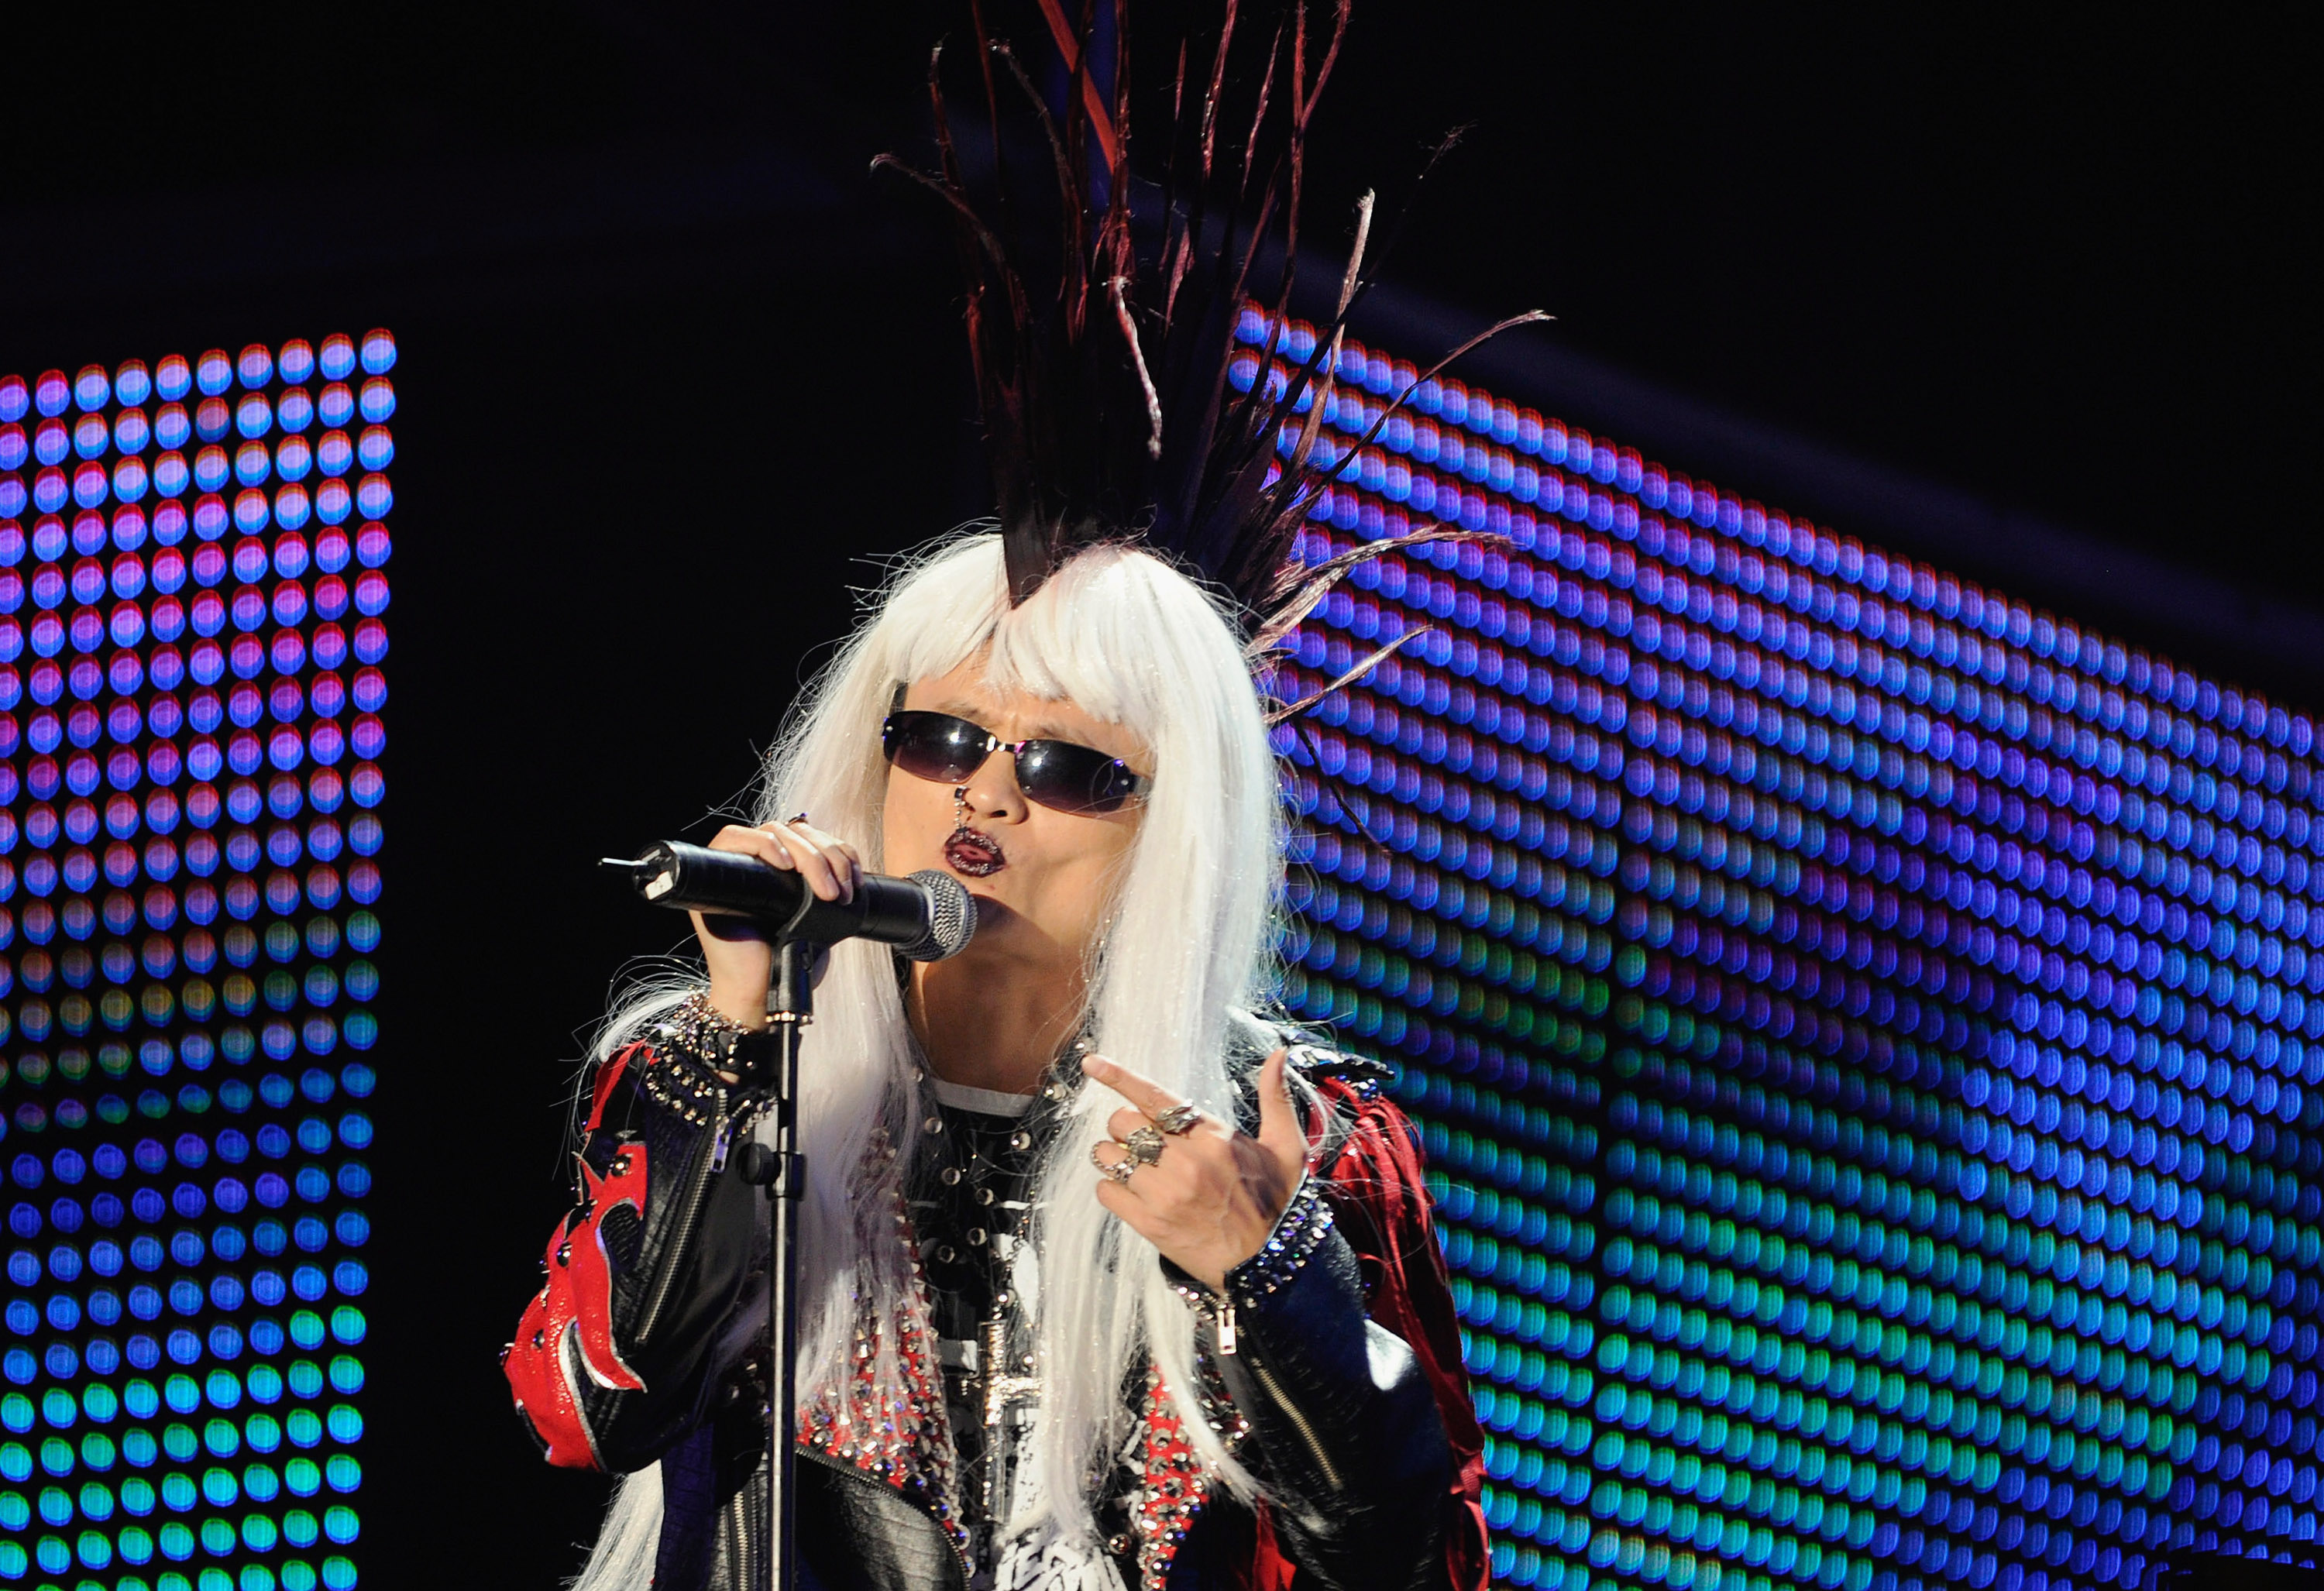 HANGZHOU, CHINA -  Alibaba Group Chairman and Chief Executive Officer Ma Yun dressed as a punk rocker performs during the 10th anniversary celebration of  Alibaba Group founding at Huanglong Sports Center on September 10, 2009 in Hangzhou, Zhejiang Province of China.  (Photo by ChinaFotoPress/Getty Images) (ChinaFotoPress&mdash;Getty Images)